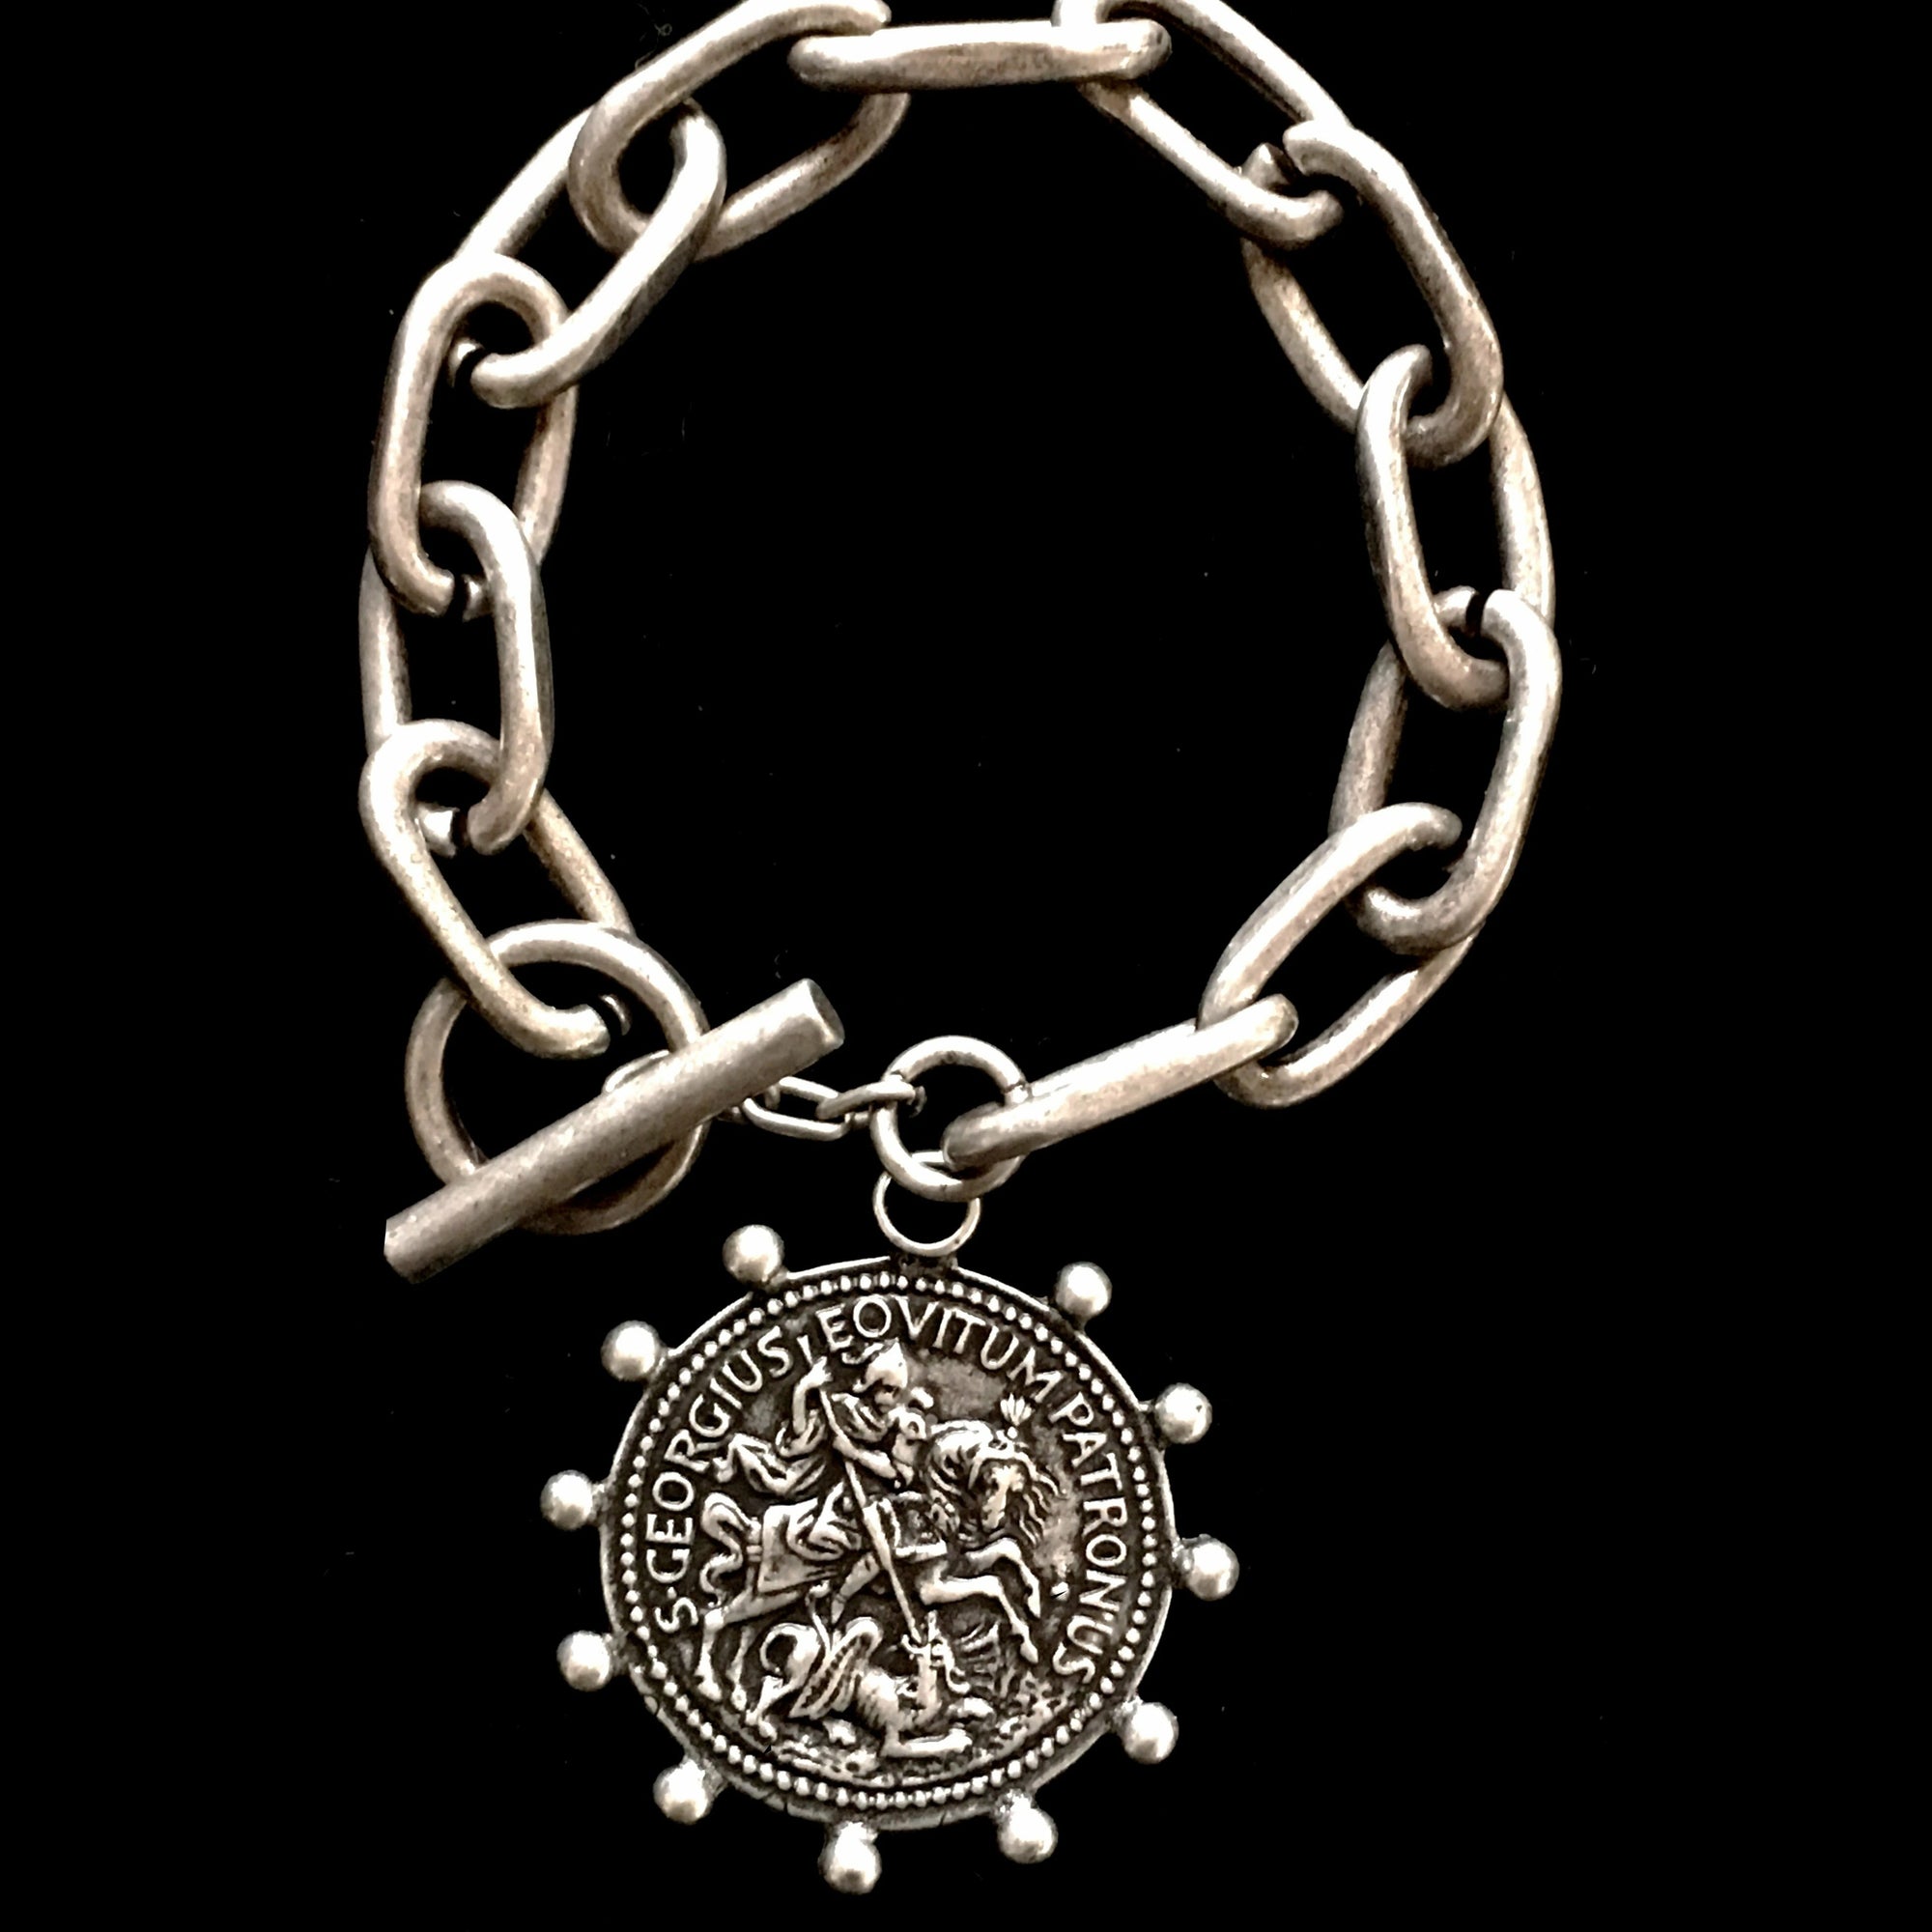 Saint George Patron Saint of Equestrians Chain Link Bracelet by Whispering Goddess - Silver